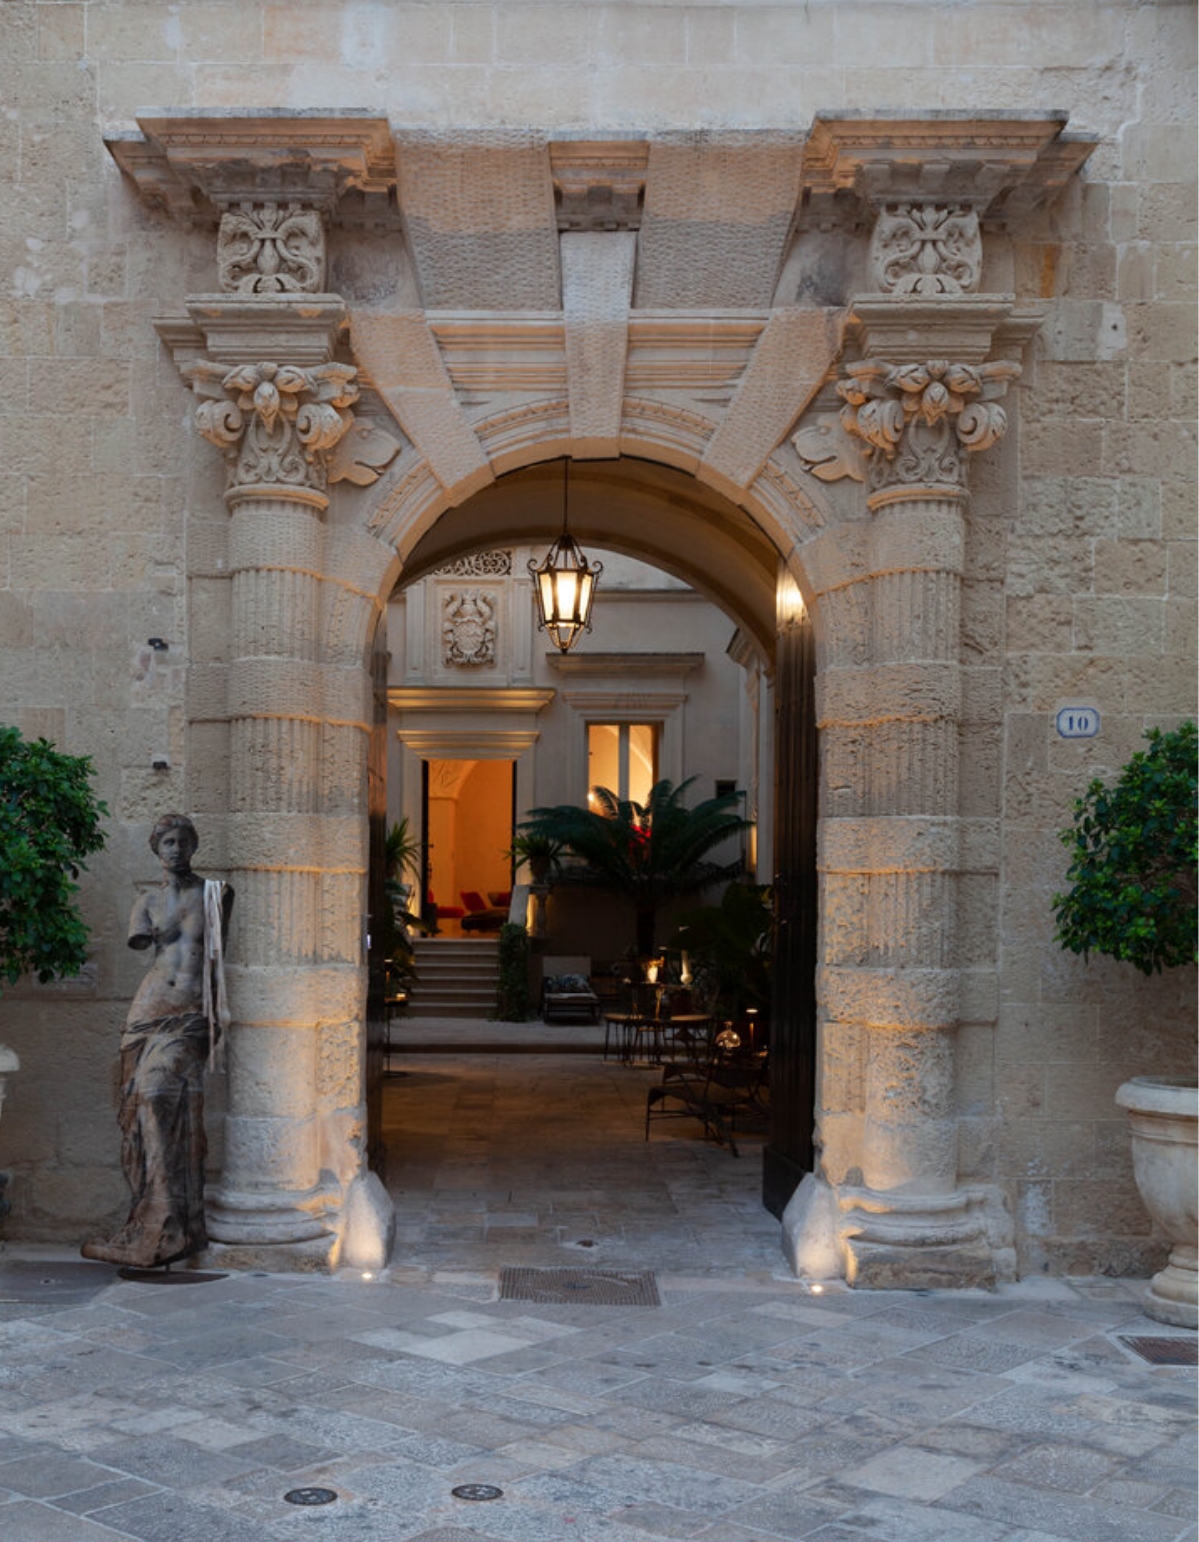 Palazzo Maresgallo - Lecce - exclusive accommodations - exhibitions - rooftop - luxury meeting room